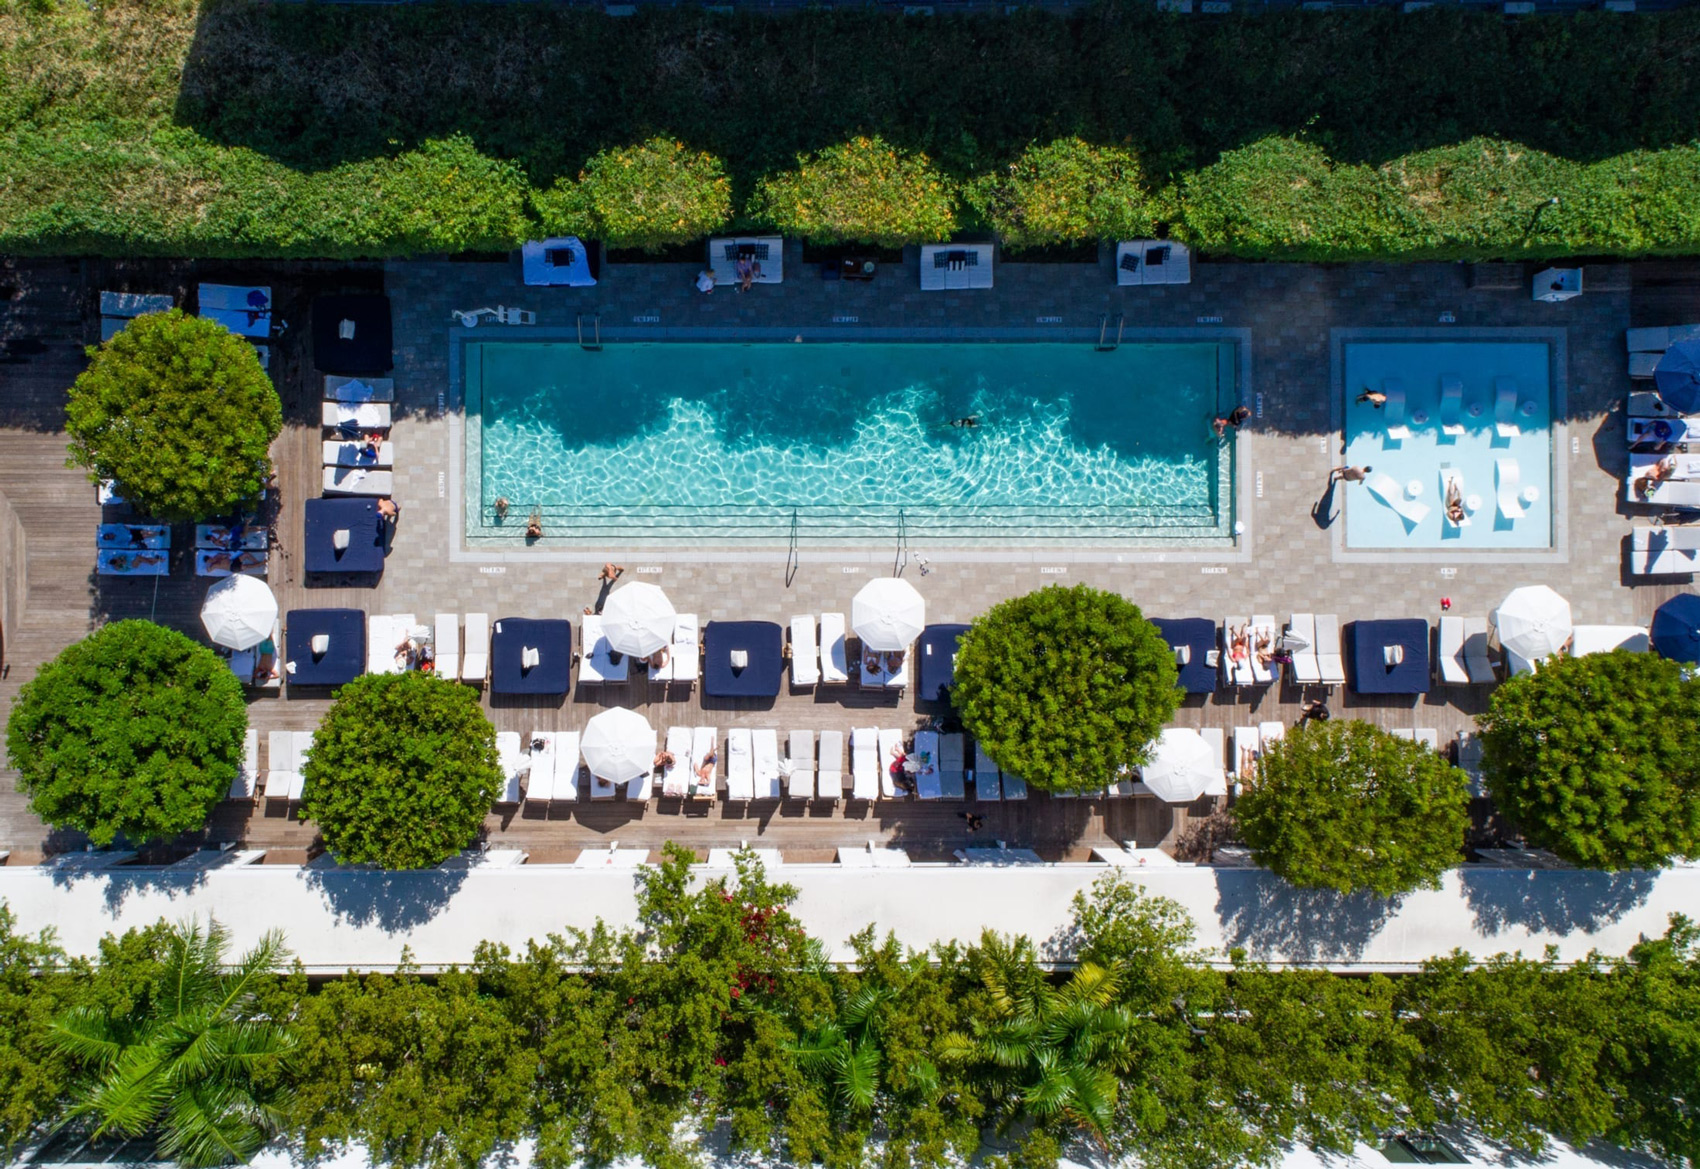 Best Business Hotels in Miami: Nautilus South Beach